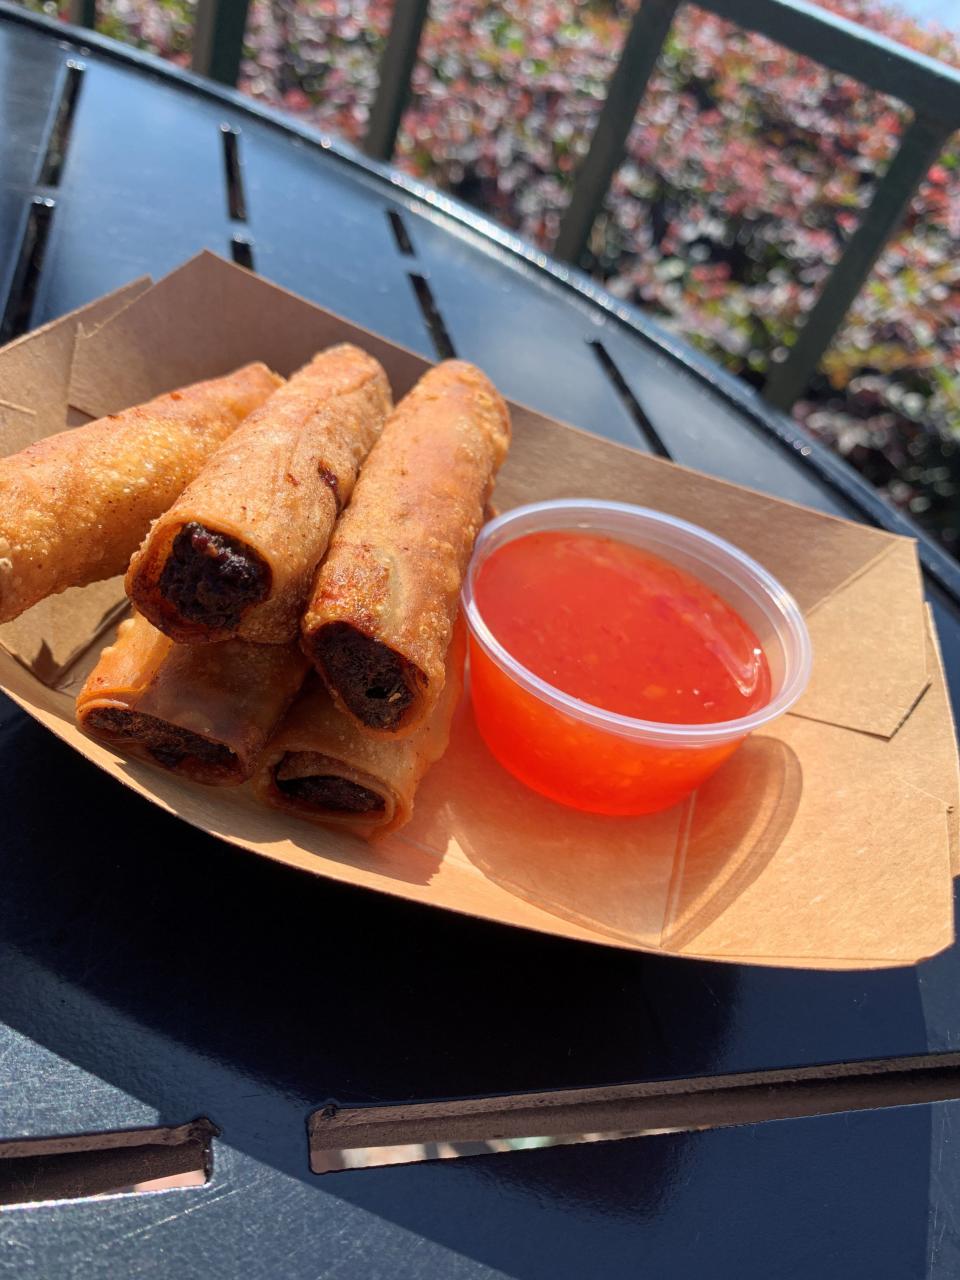 You'll never miss the meat in the Impossible Lumpia at the Trowel & Trellis kitchen near Port of Entry at the Epcot International Flower & Garden Festival.